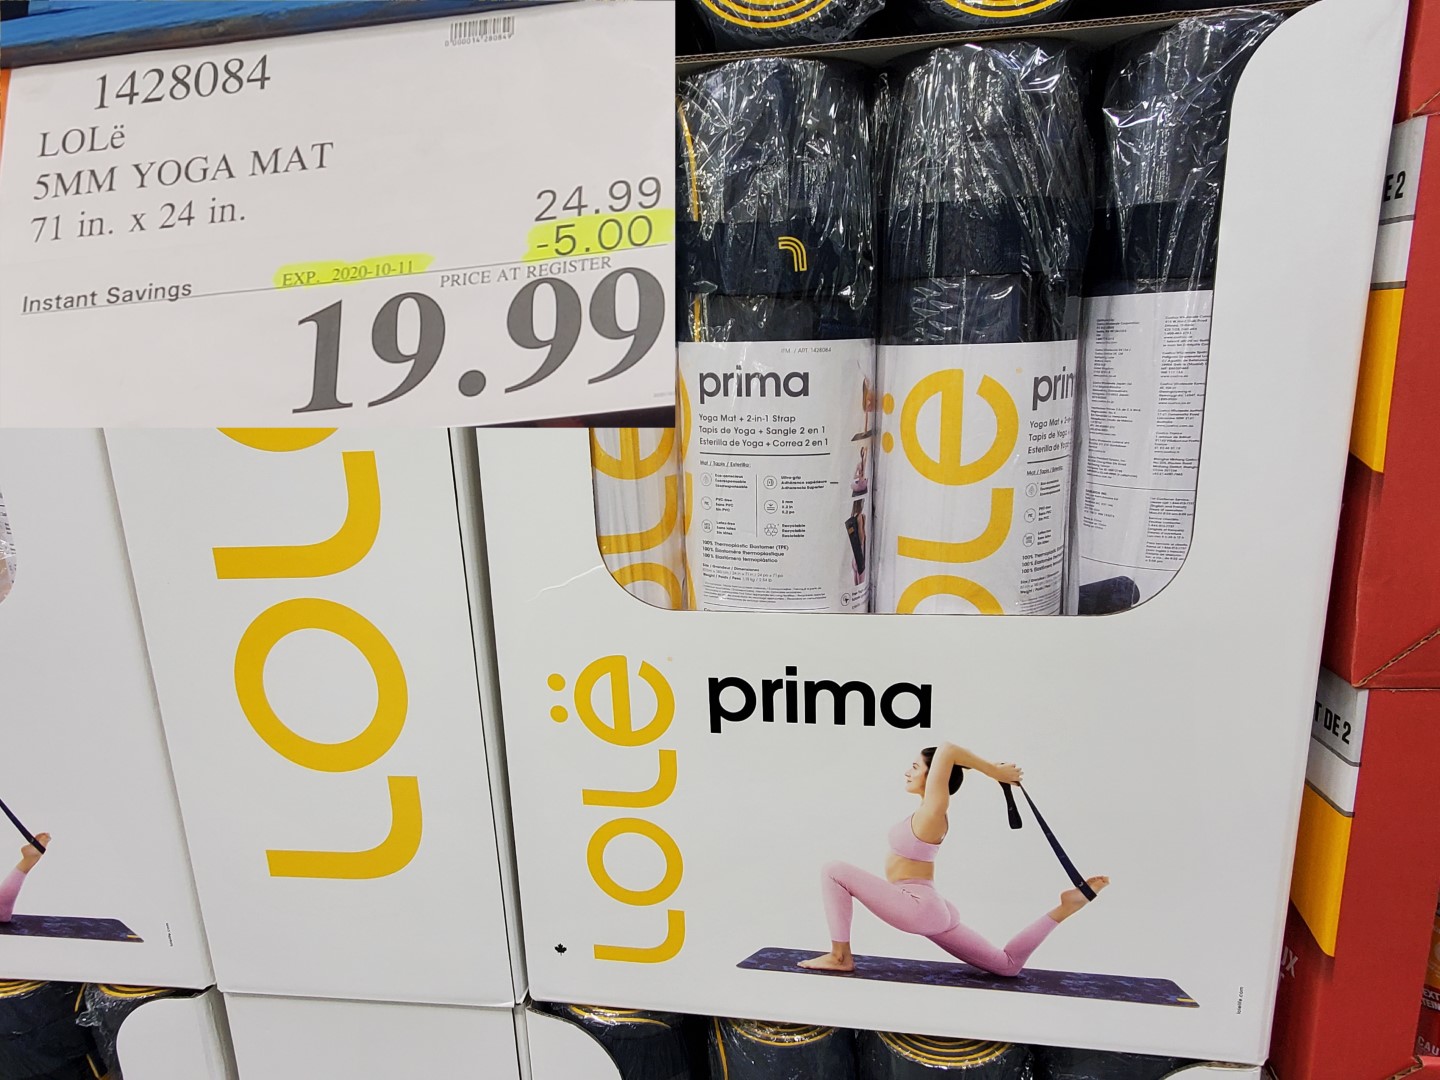 Costco] Costco.ca: Lole yoga mat with 2in 1 strap $24.99 - RedFlagDeals.com  Forums